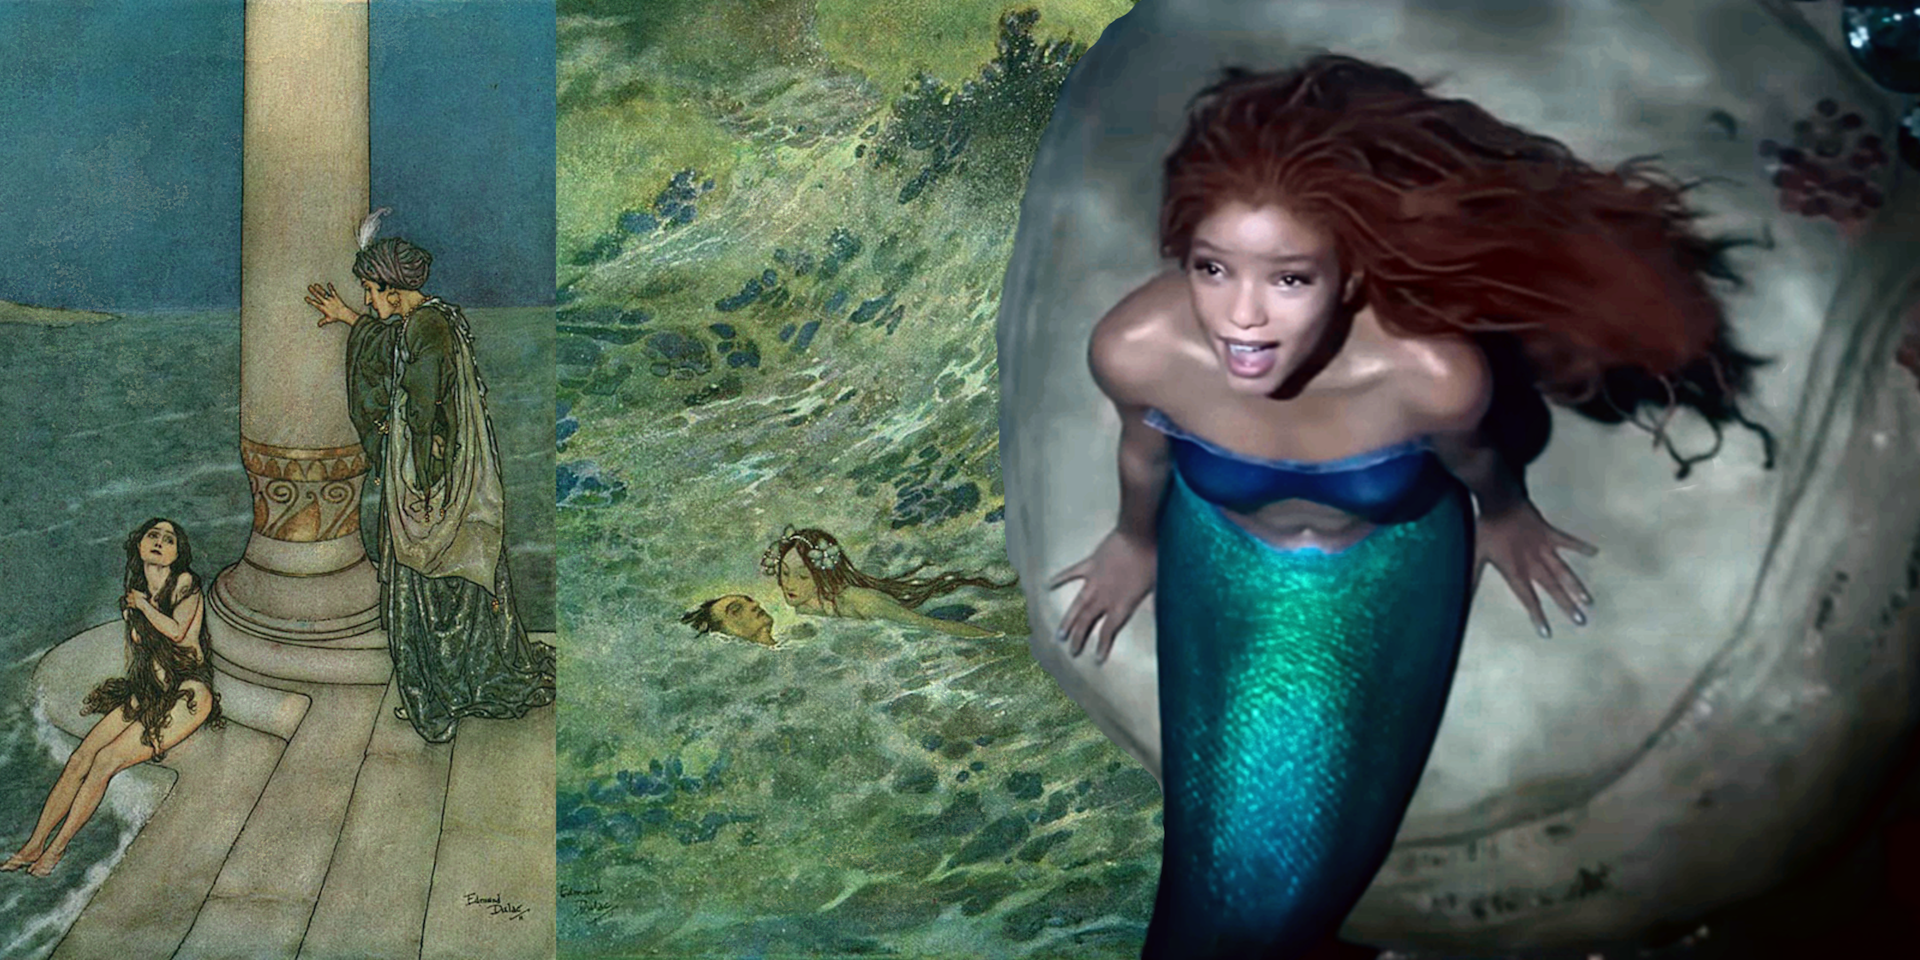 The Little Mermaid has always been a story about exclusion pic